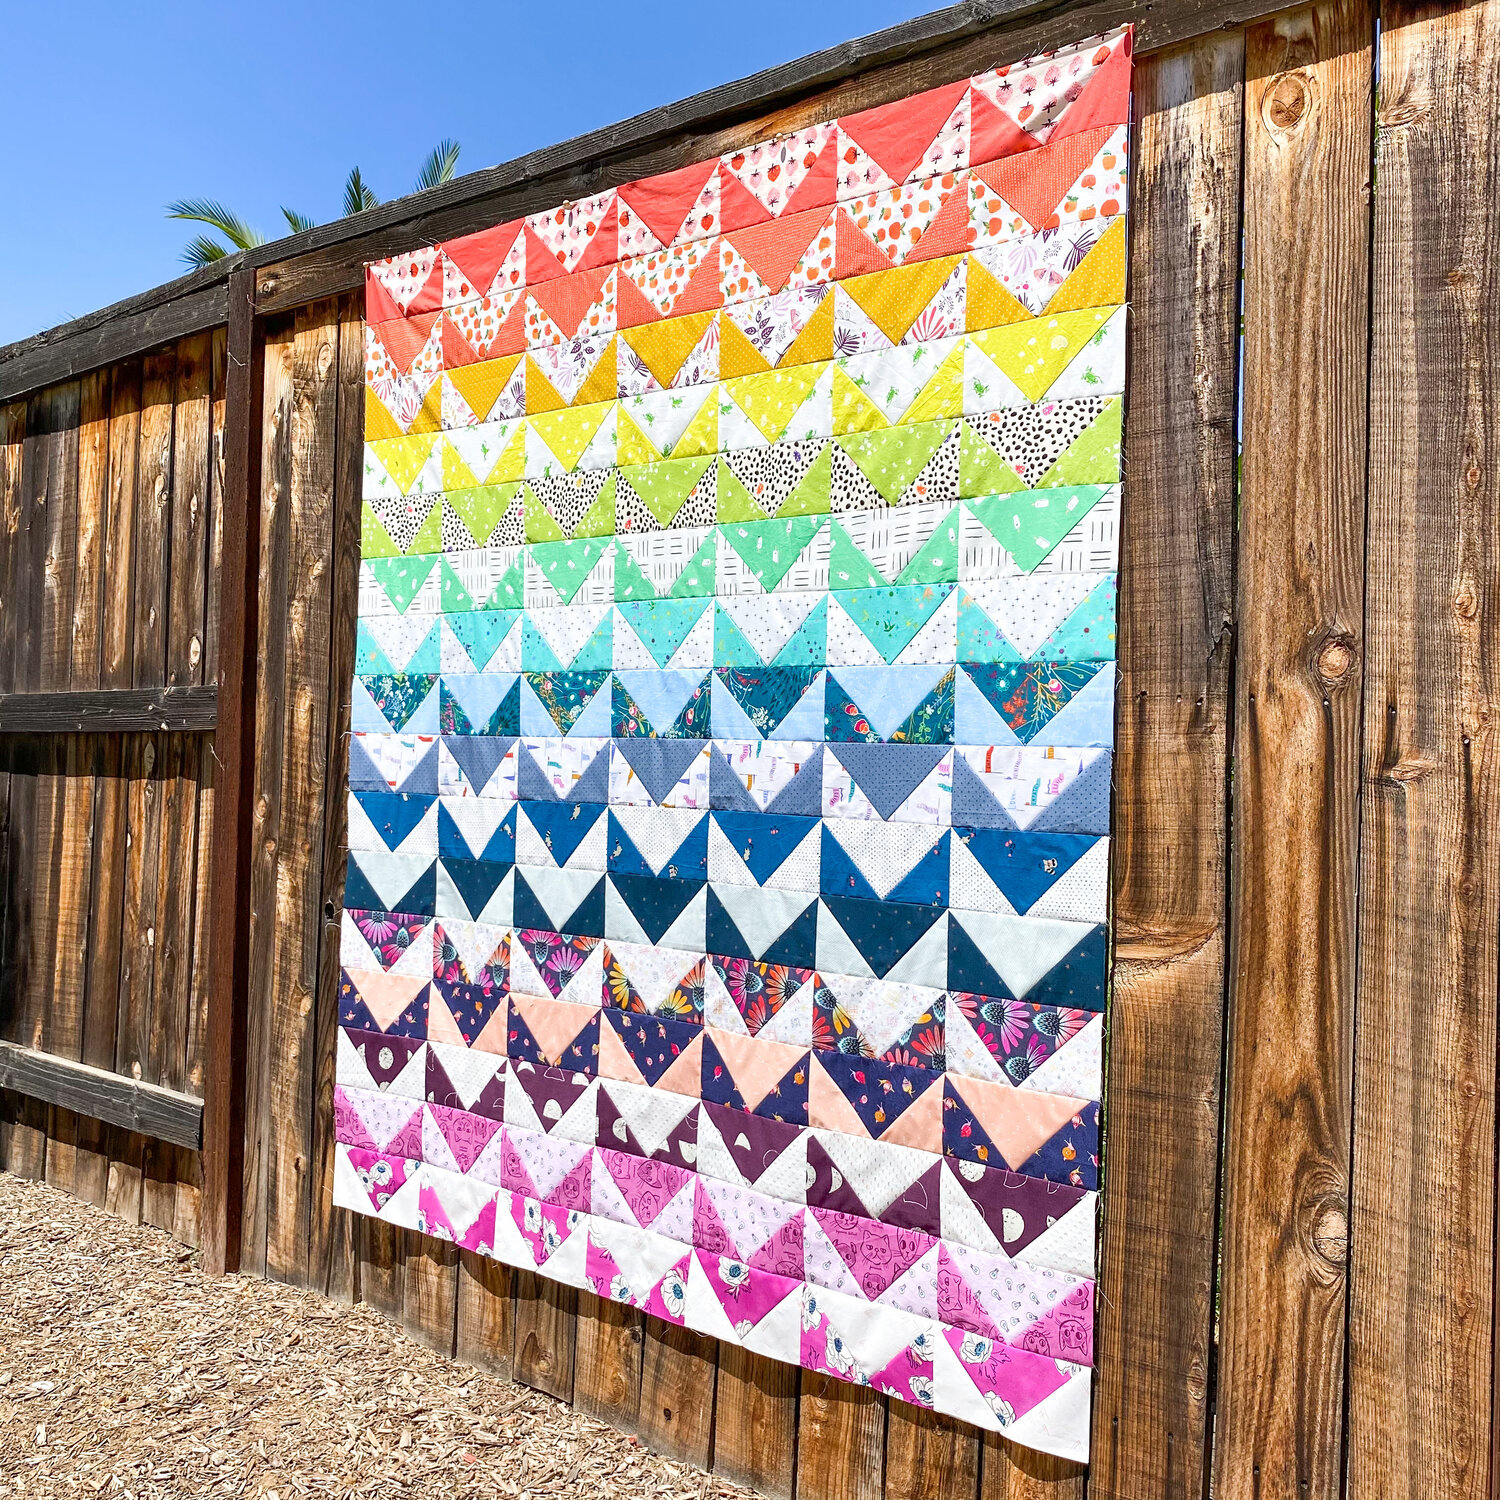 As Erin’s quilt came together, I was sitting at the edge of my seat! With each sneak peek I could barely wait to see more! I love the bright and bold shades and the way they transition with the scrappy background fabrics. I first found Erin through bag making, but she can make anything - and she shares it all on IG @limabeanloves.